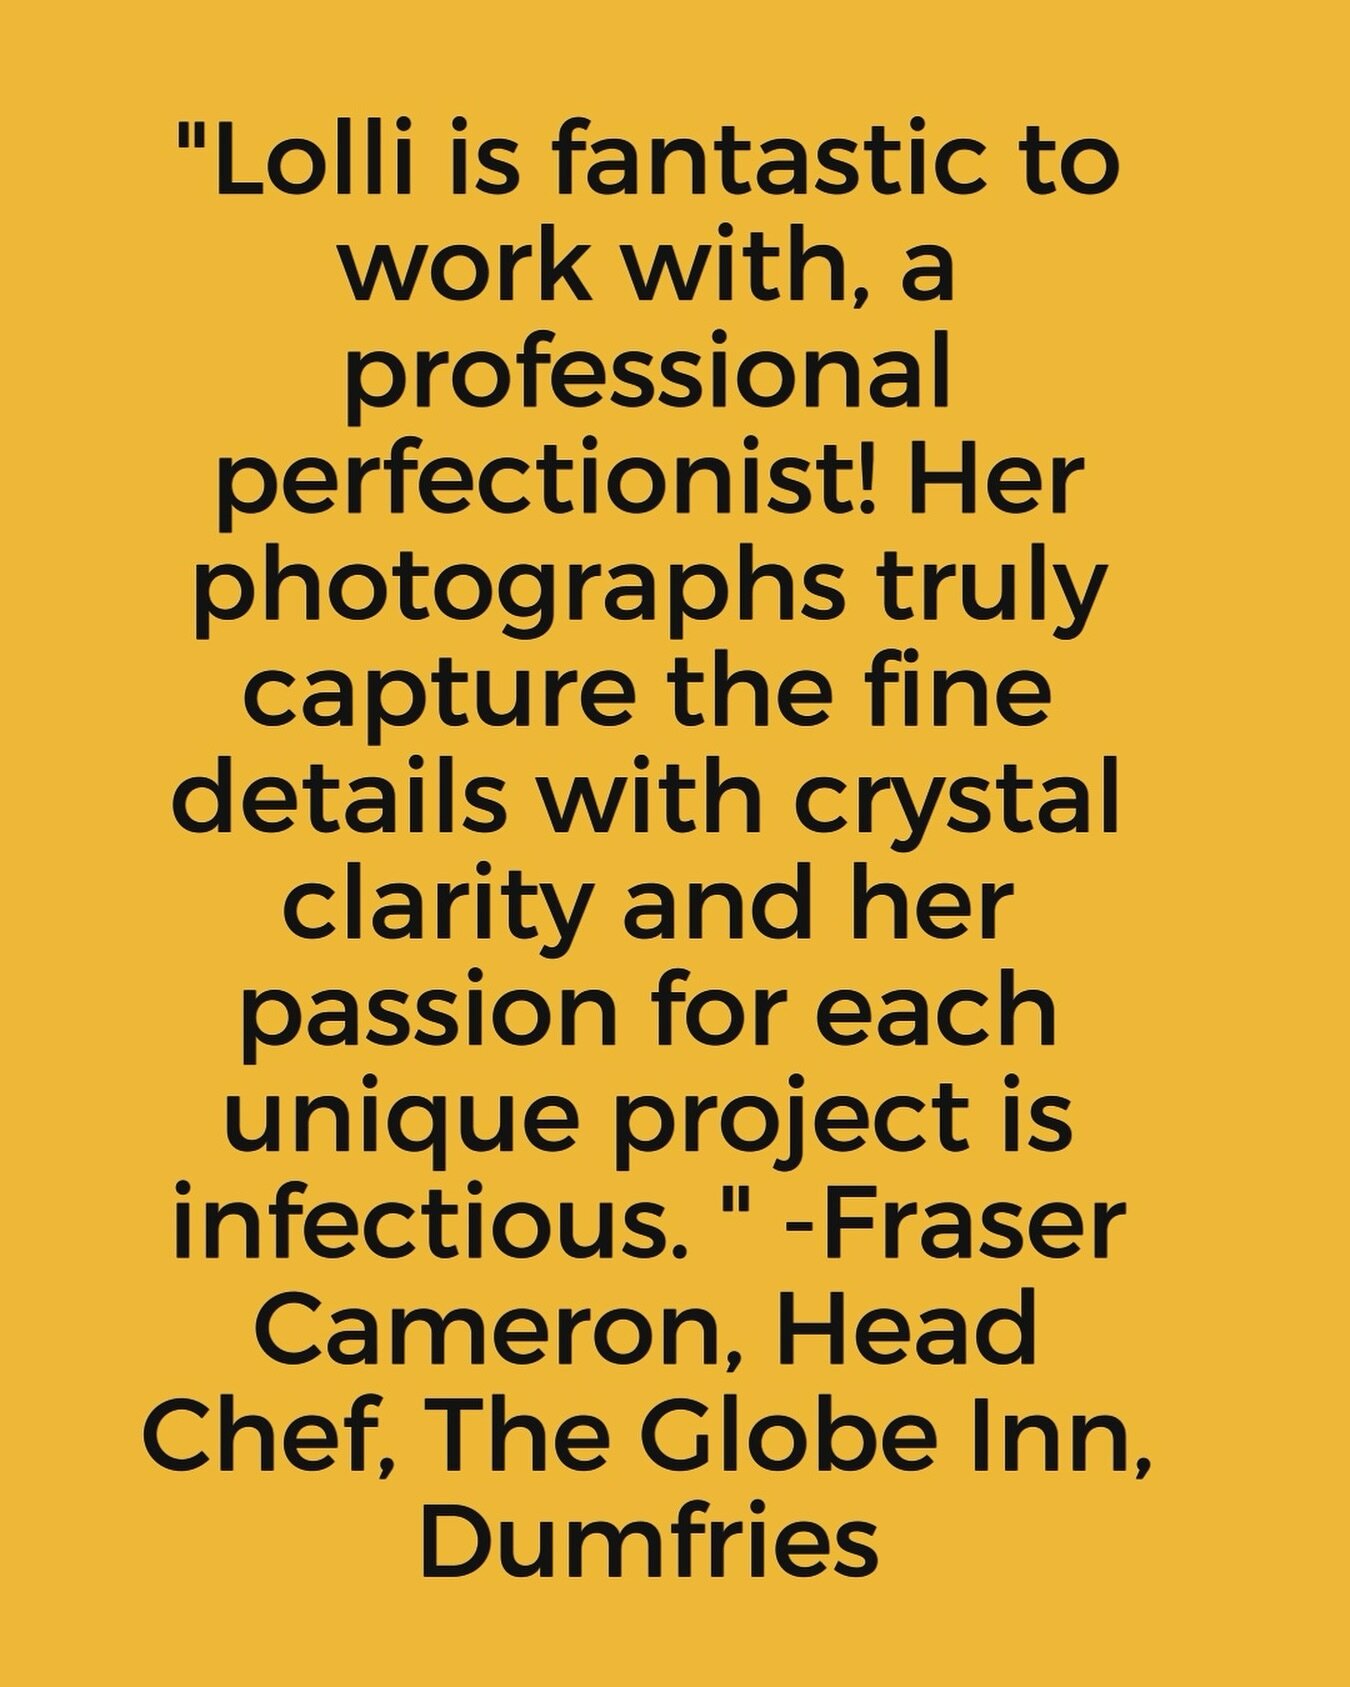 🙌 Thank you @frazzlecam ☺️ It&rsquo;s an absolute pleasure to work with you and The talented Globe Inn team 💪🏻 🍭 

#lollimakingfoodpop
#restaurantphotography 
#commercialphotographer
#foodphotographer
#foodporn 
#lolliography
#dglifemag 
#lovedan